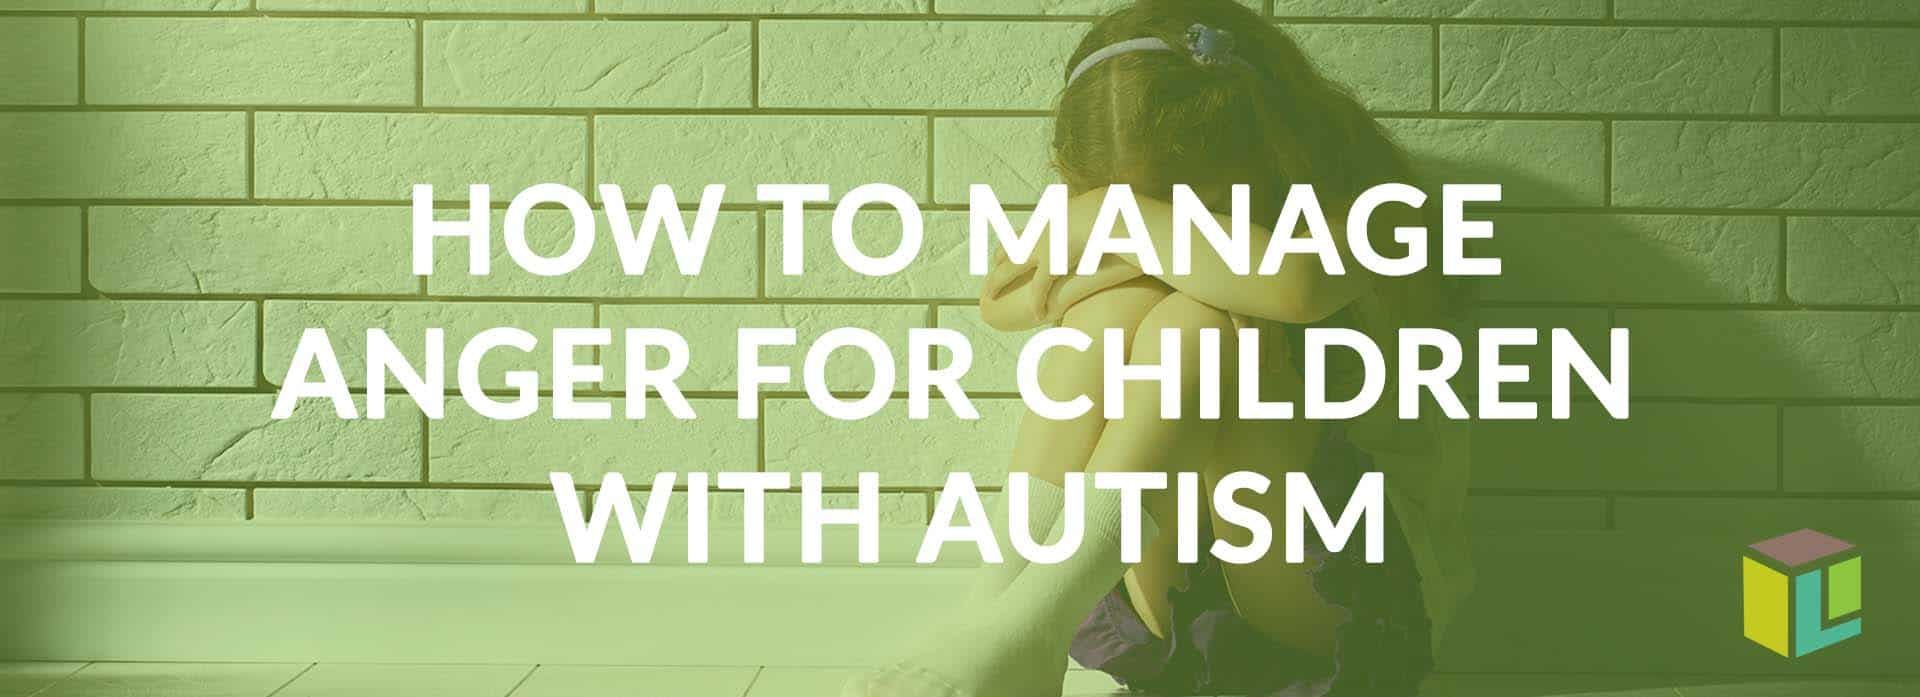 How To Manage Anger For Children With Autism How To Manage Anger For Children With Autism How To Manage Anger For Children With Autism How To Manage Anger For Children With Autism